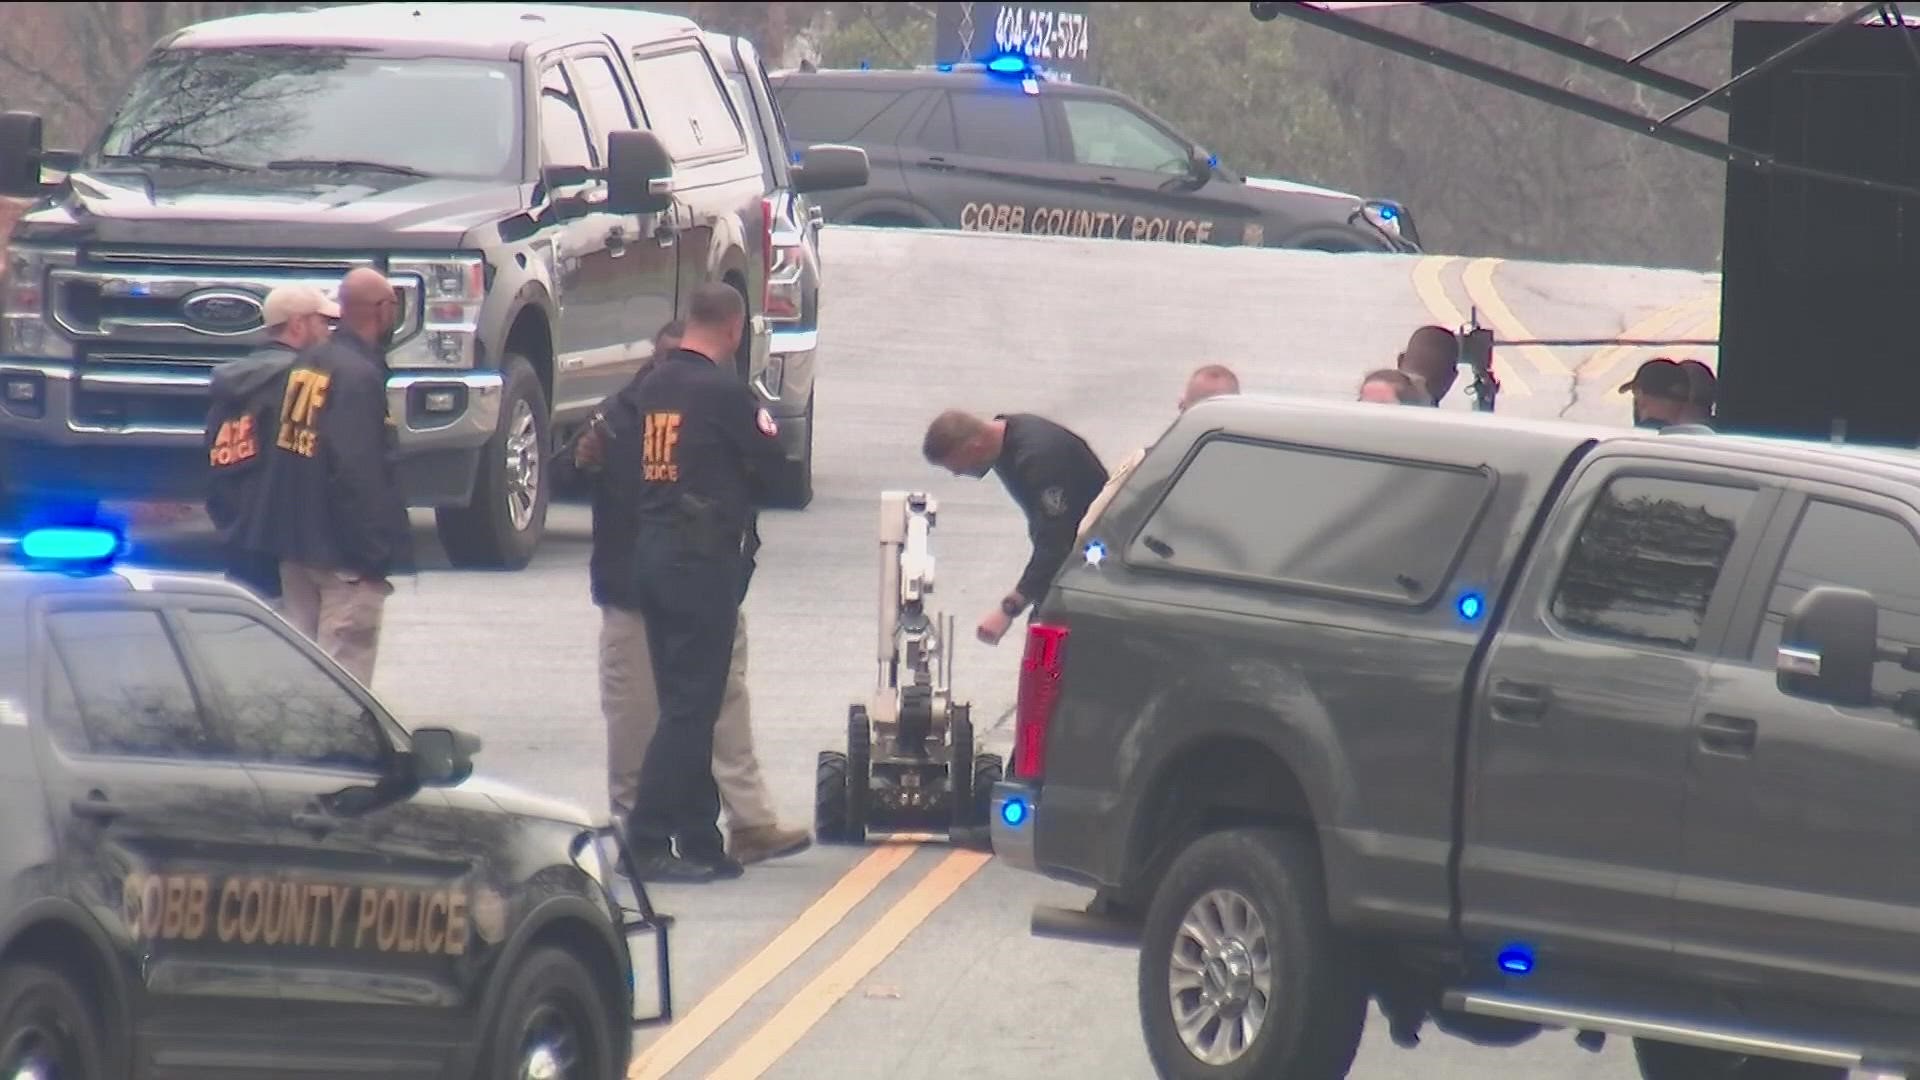 Around noon, bomb squads removed the alleged pipe bomb from the truck.